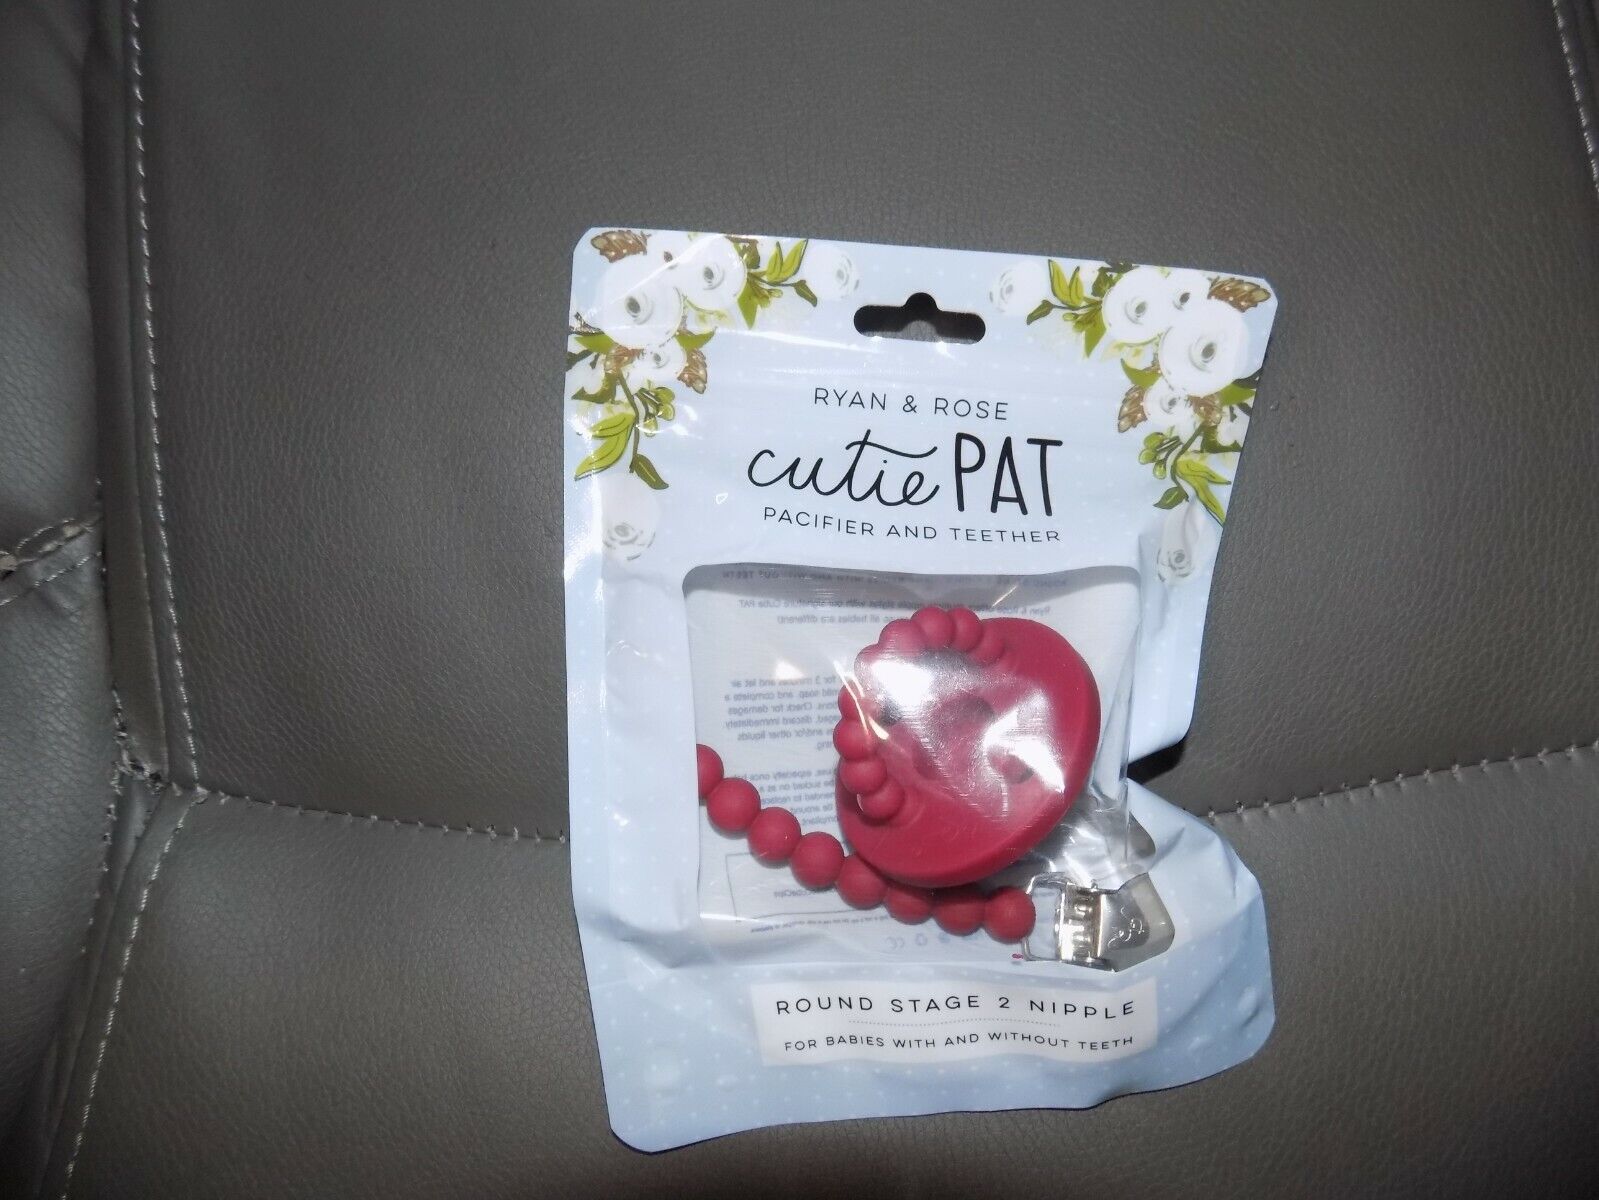 Ryan Cheap SALE wholesale Start & Rose Cutie Pat Pacifier 2 Teether and Stage Round Nipple